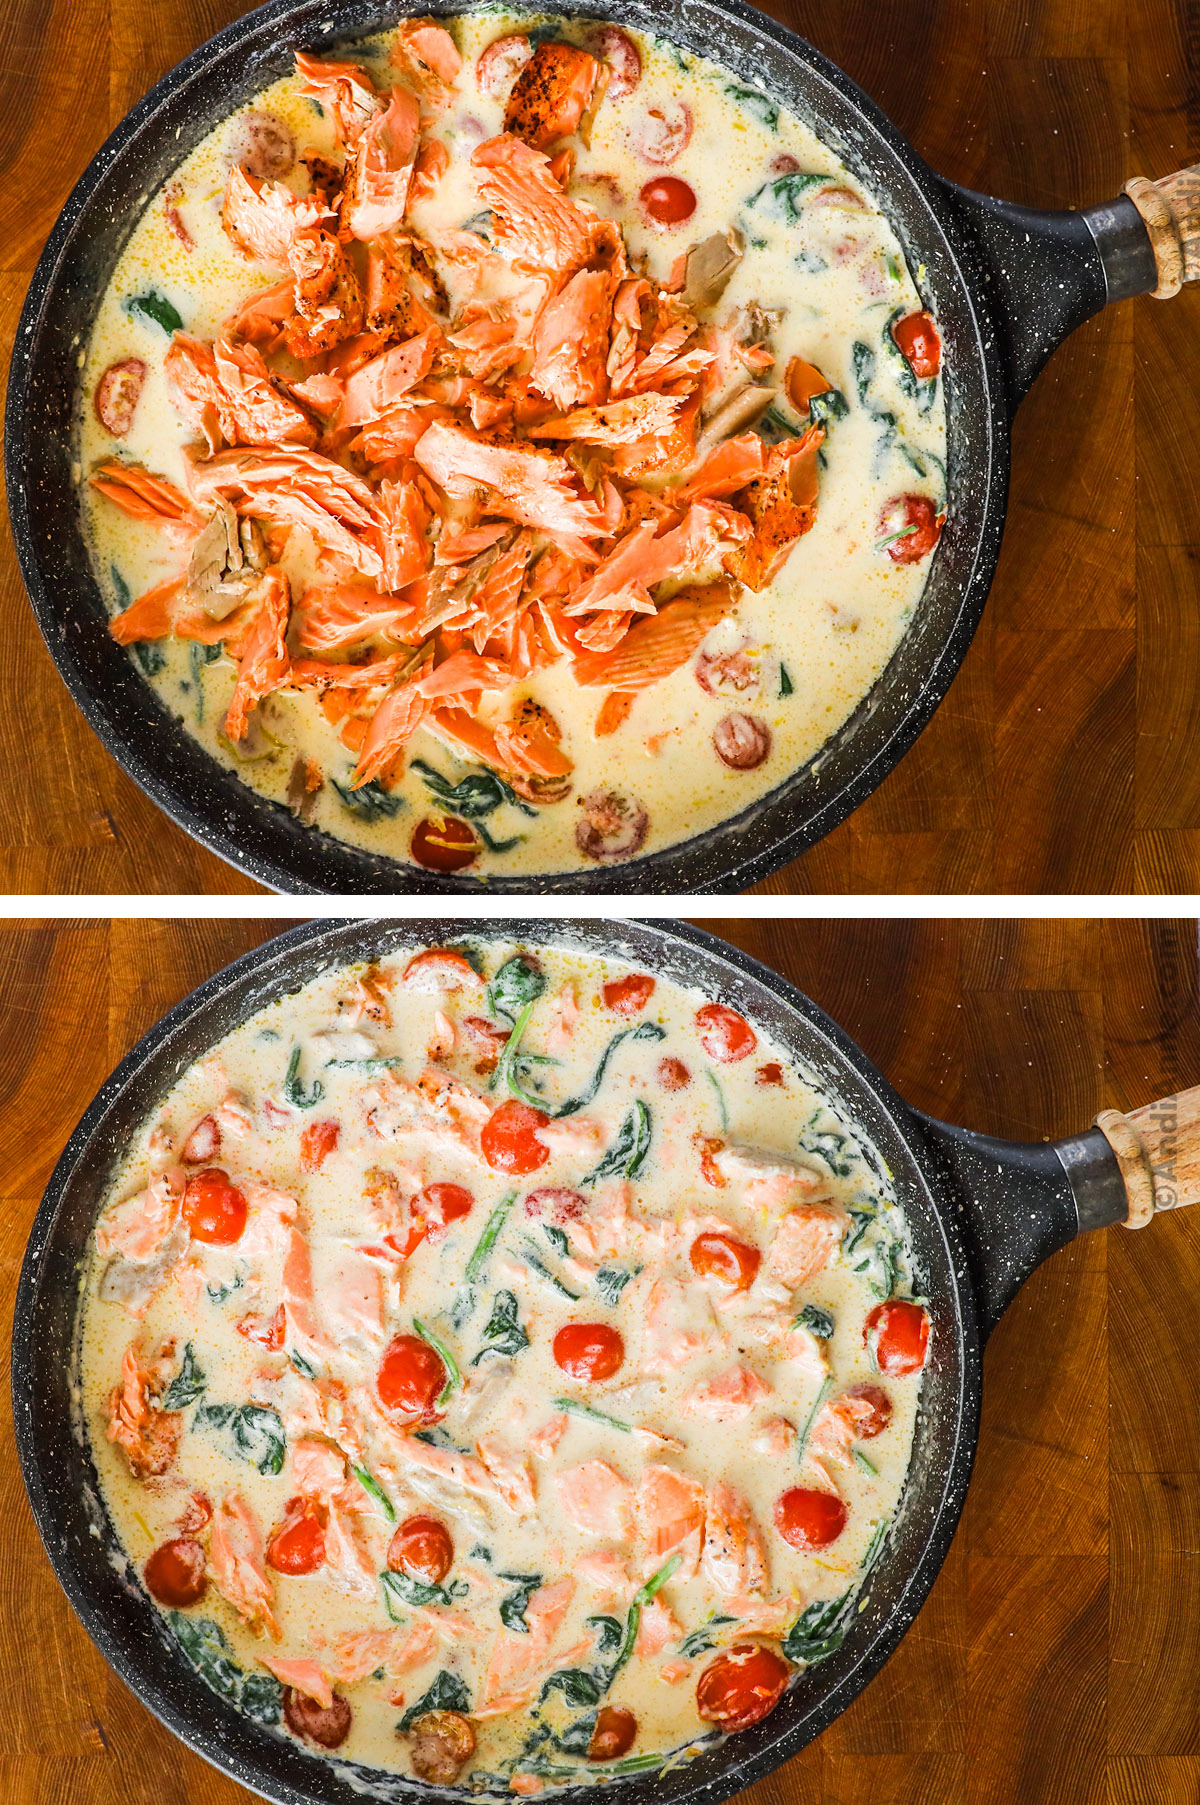 Flaked salmon dumped into the creamy sauce with vegetables